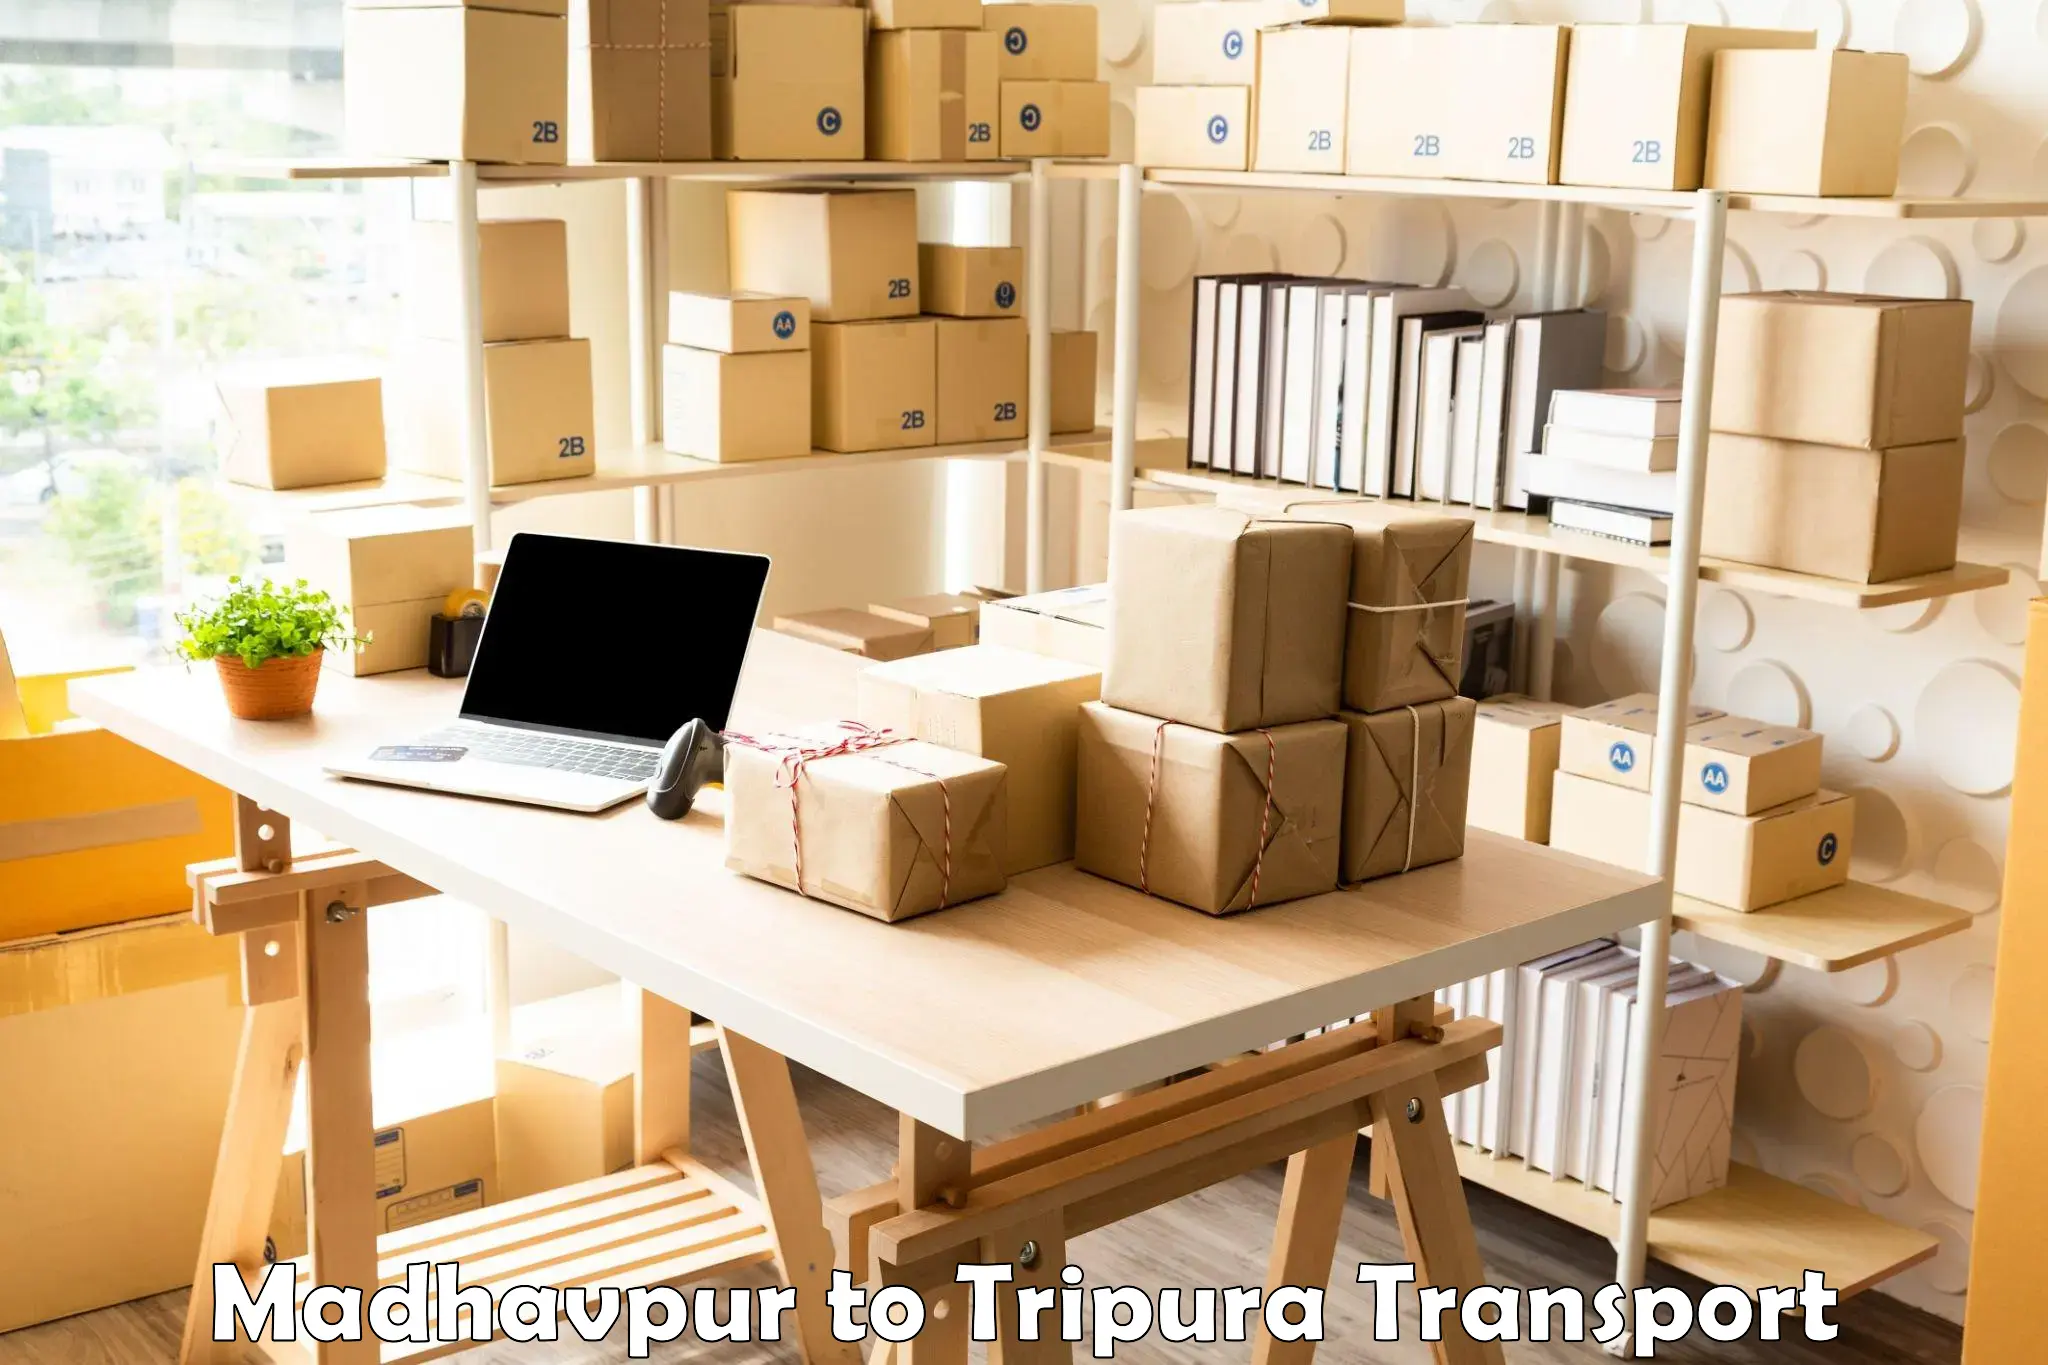 Pick up transport service in Madhavpur to Kailashahar